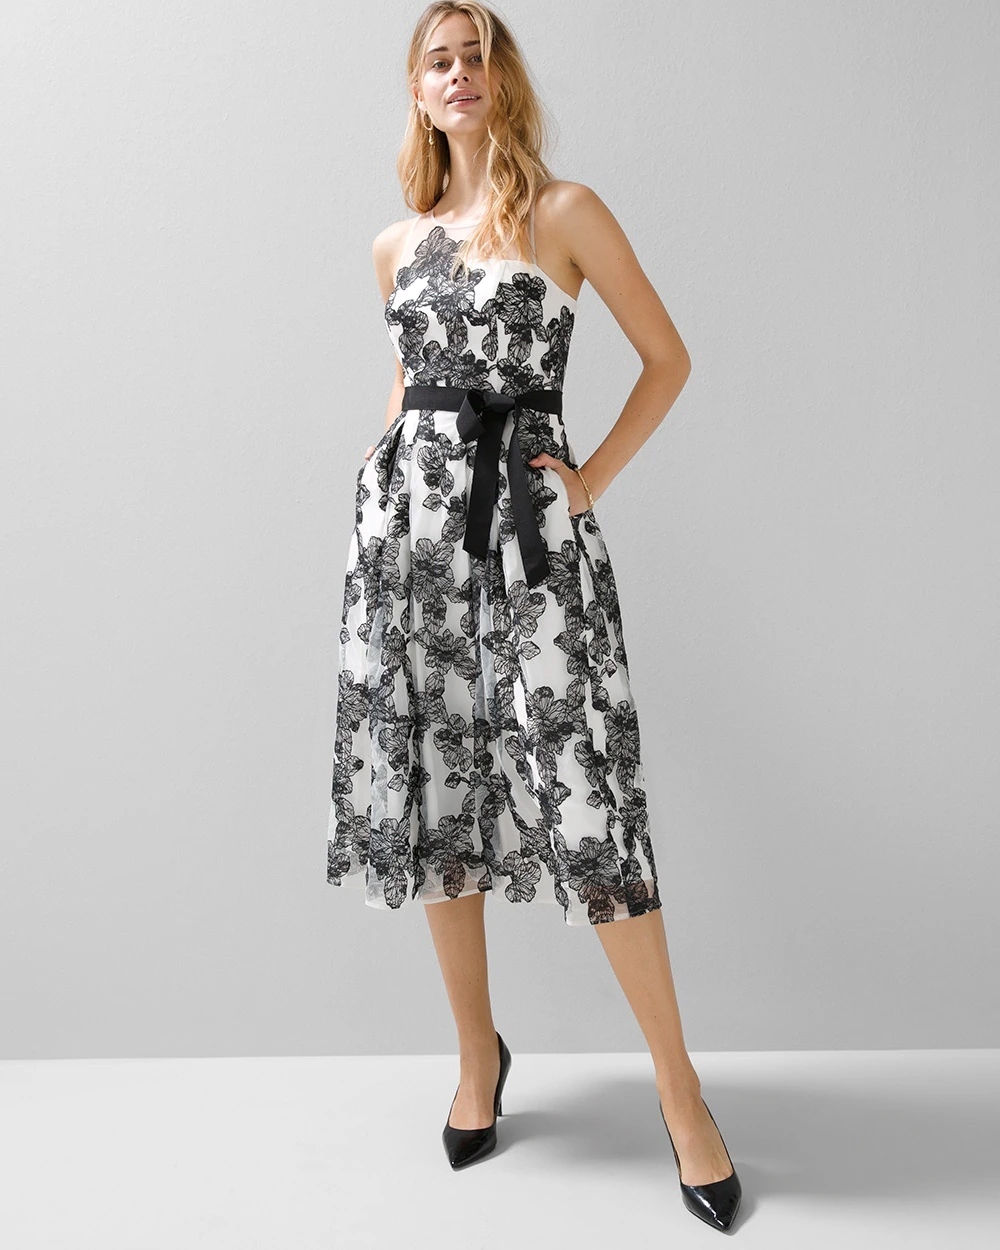 Black-White-Theme-1000x1250_0000_Embroidered_Floral_Illusion_Dress_0A.jpg